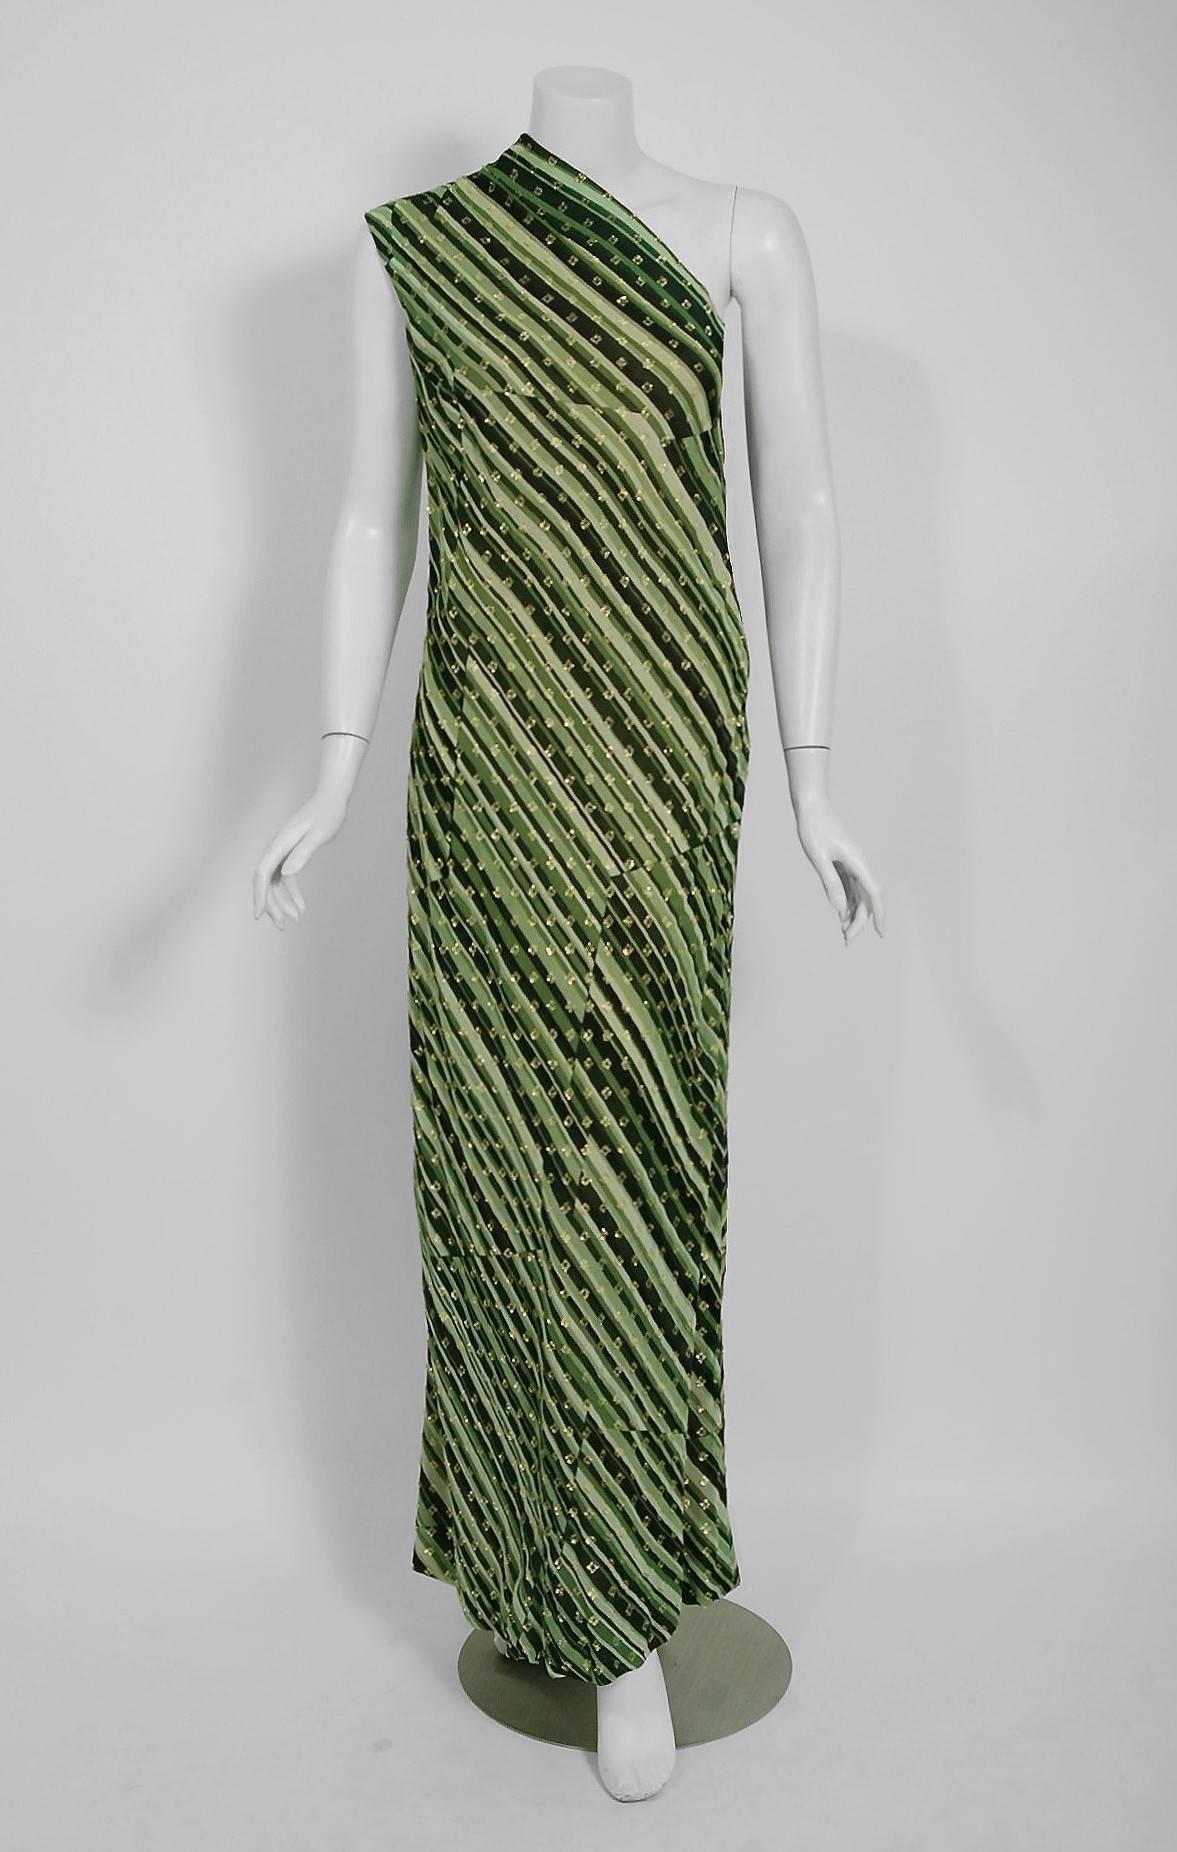 Seductive Pauline Trigere designer metallic stripe bias-cut gown dating back to the early 1970's During this time period, Pauline Trigère's name was part of the glamorous excess in Hollywood fashion. Her exquisite tailoring and feminine fitting